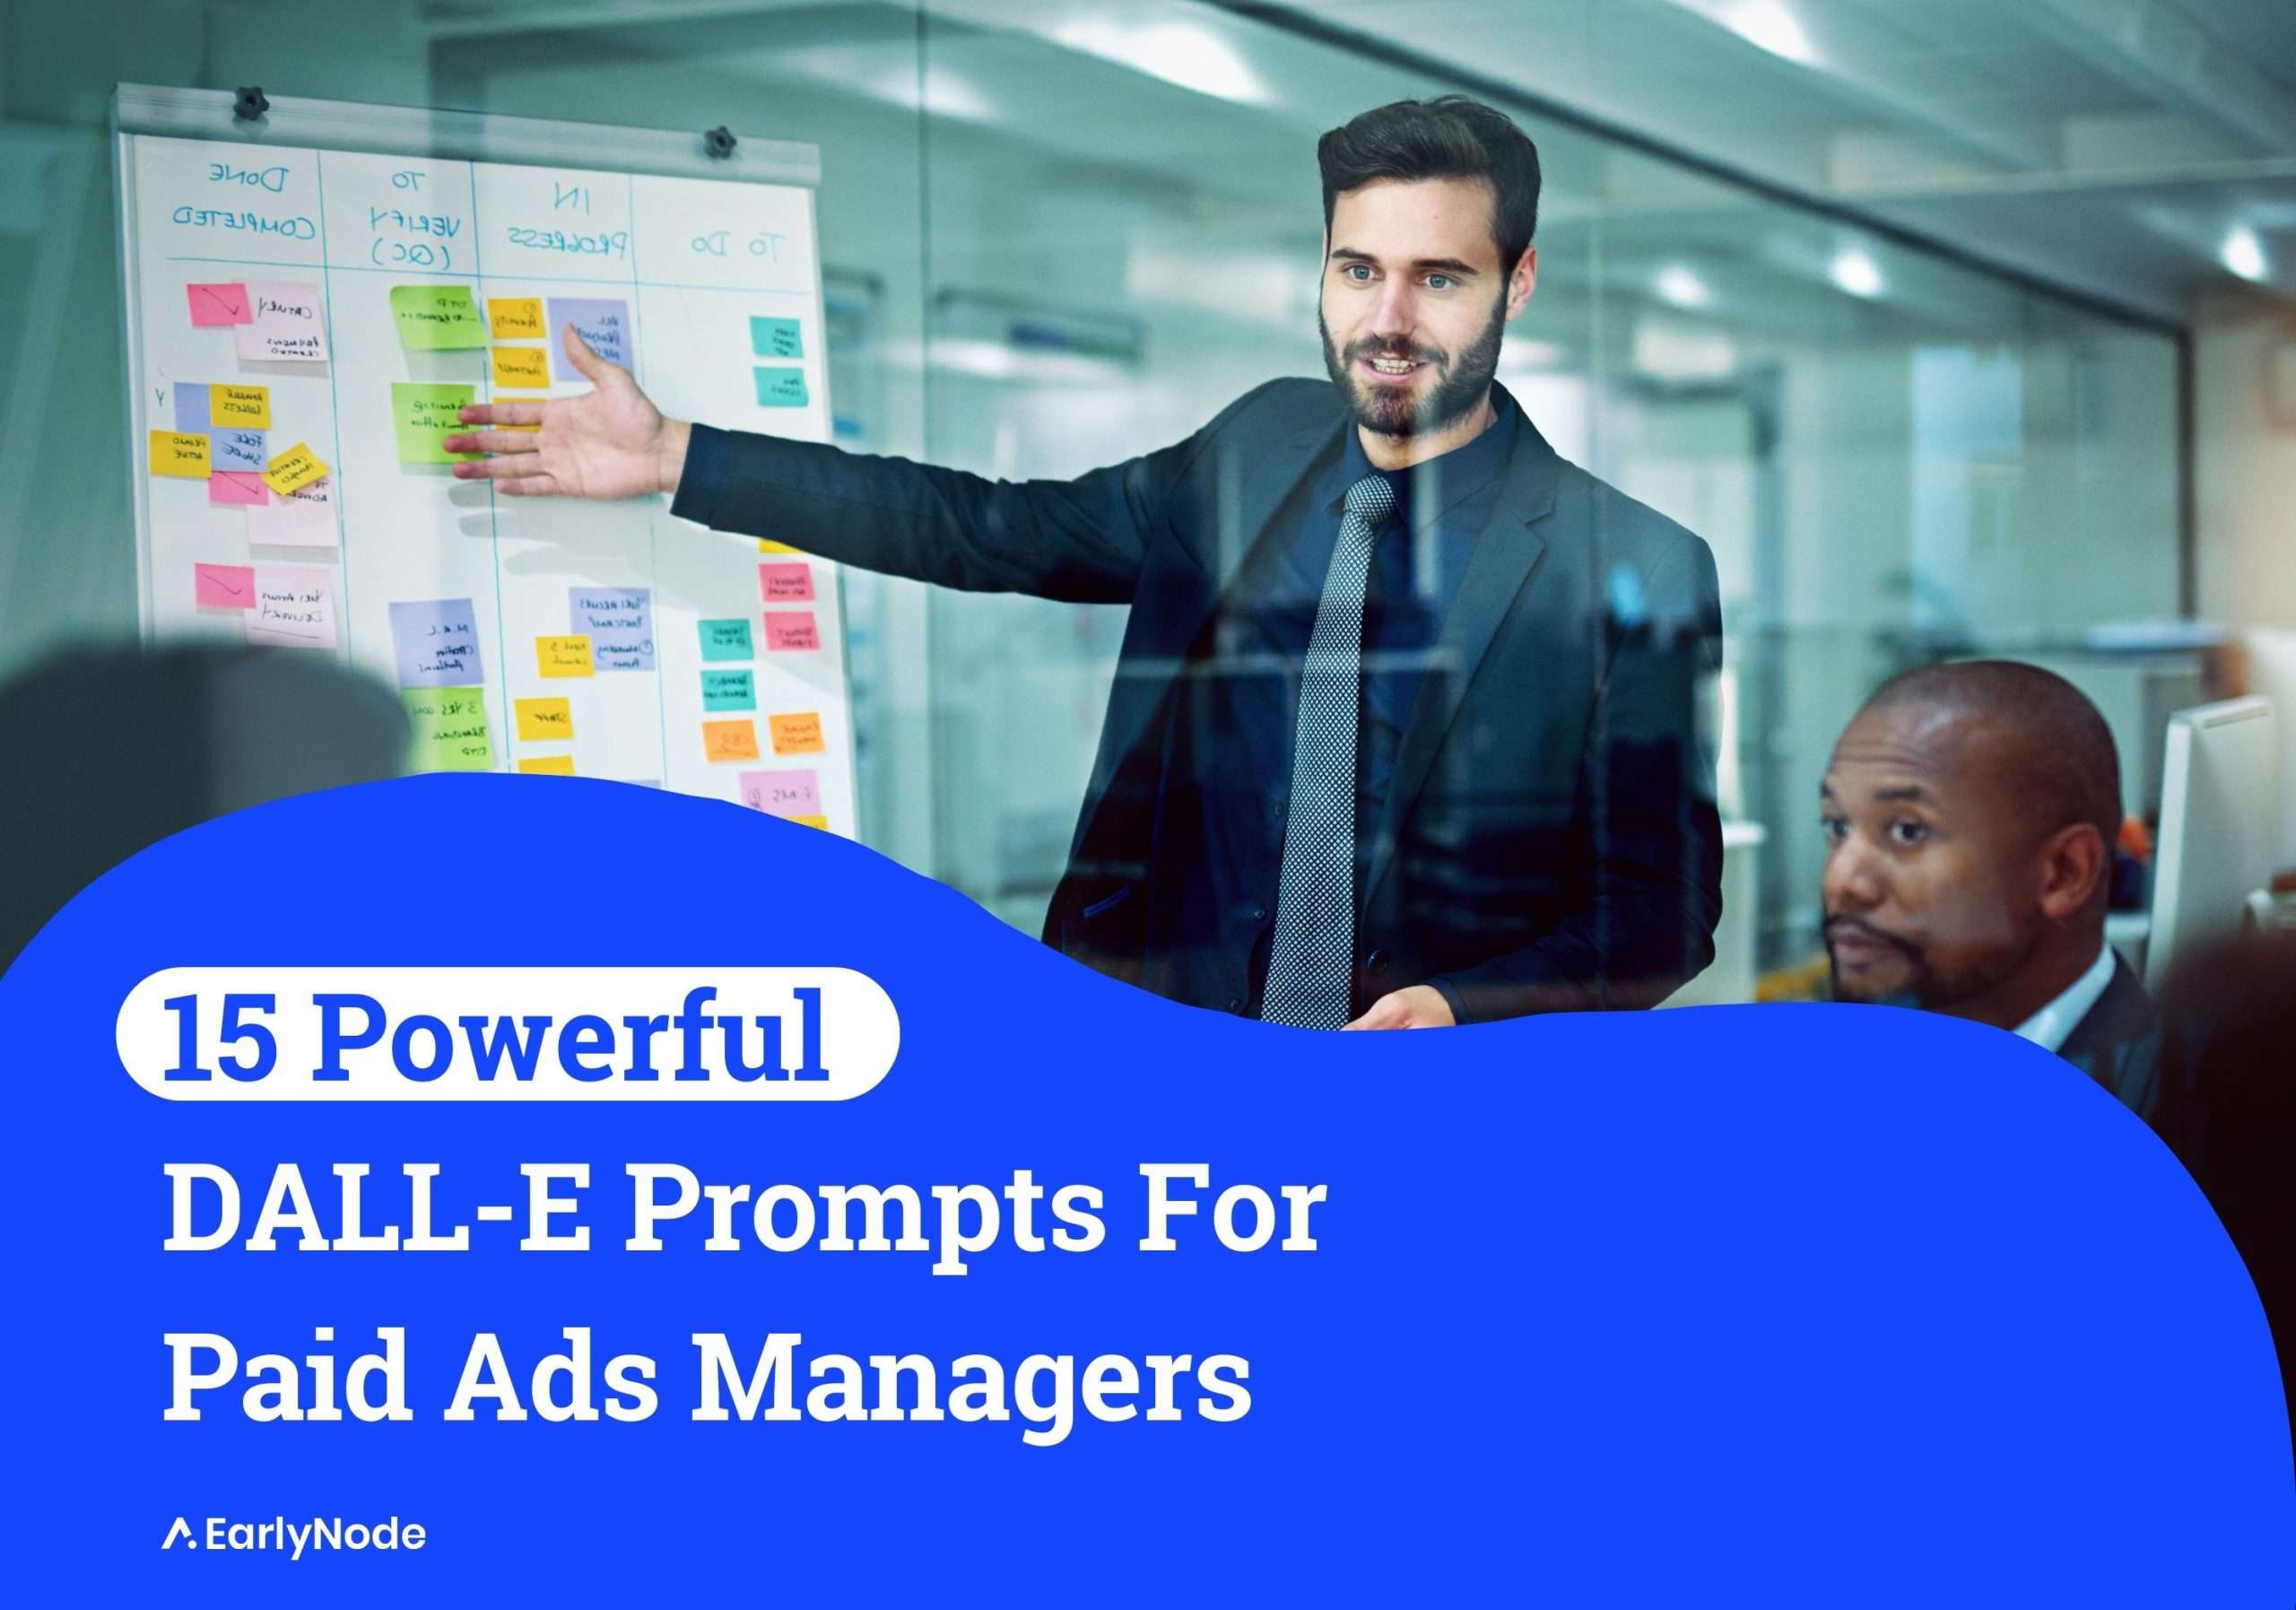 15+ Helpful DALL-E Prompts for Paid Ads Managers